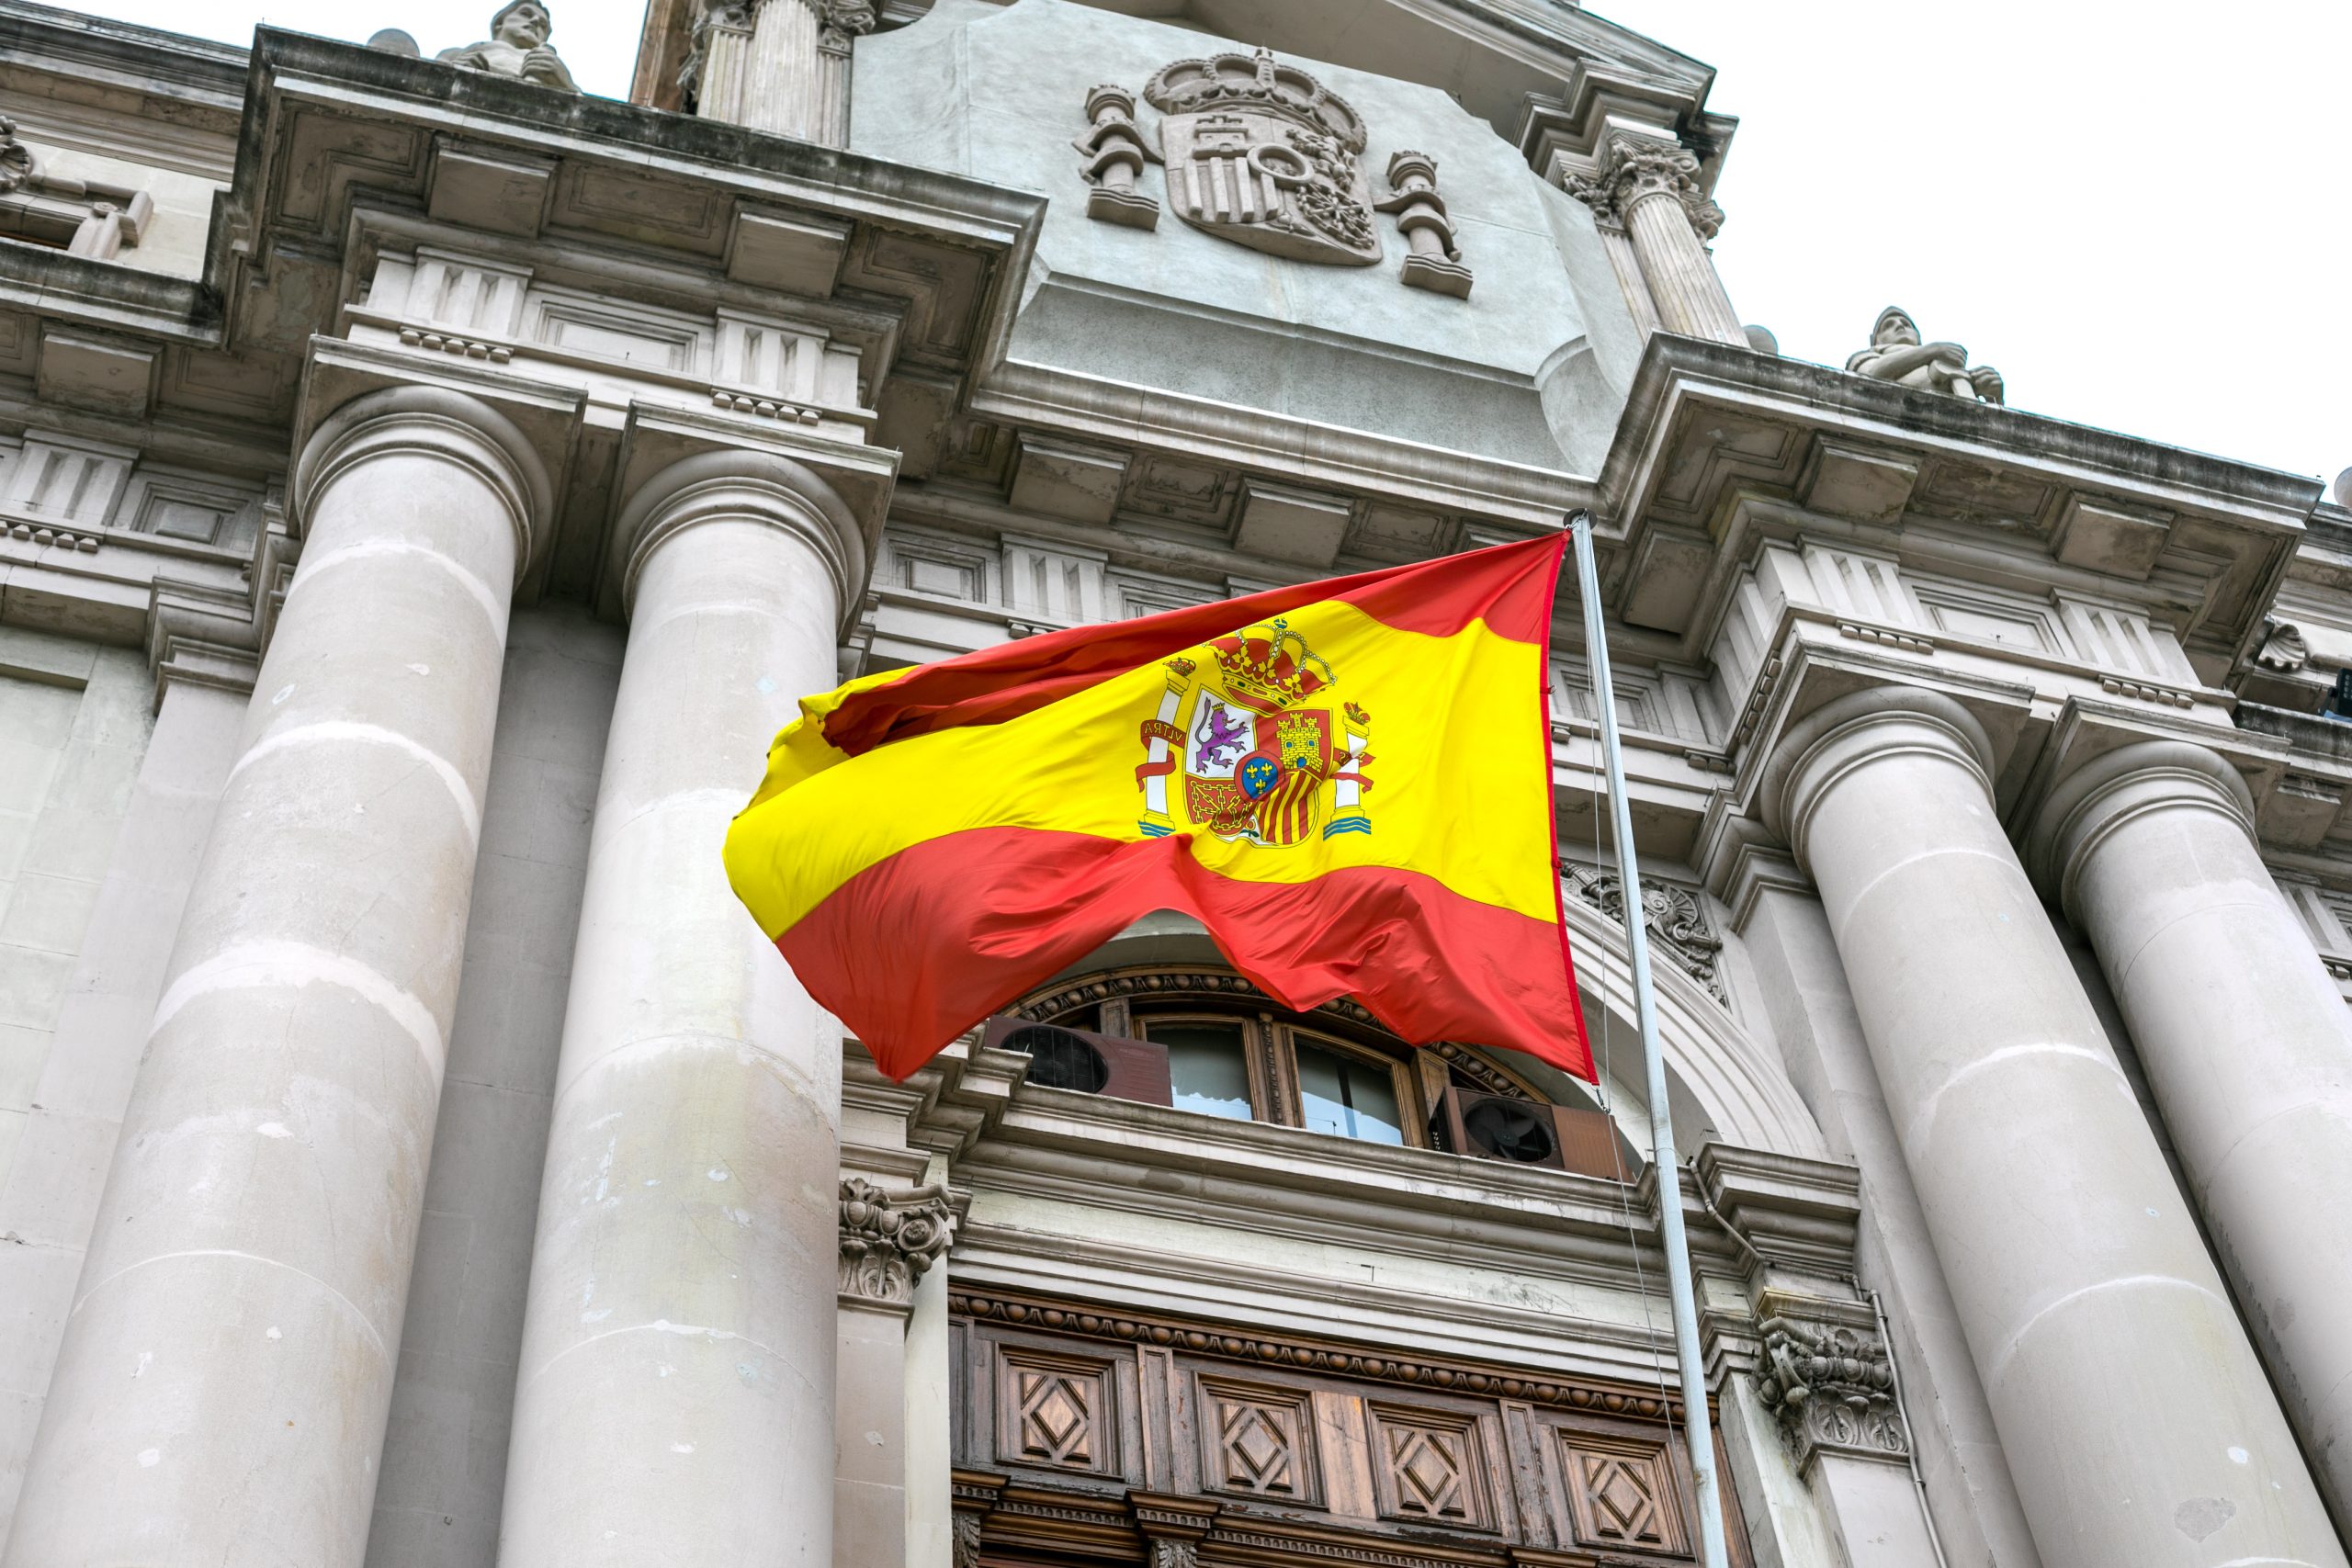 UK travellers to Spain will not need to quarantine